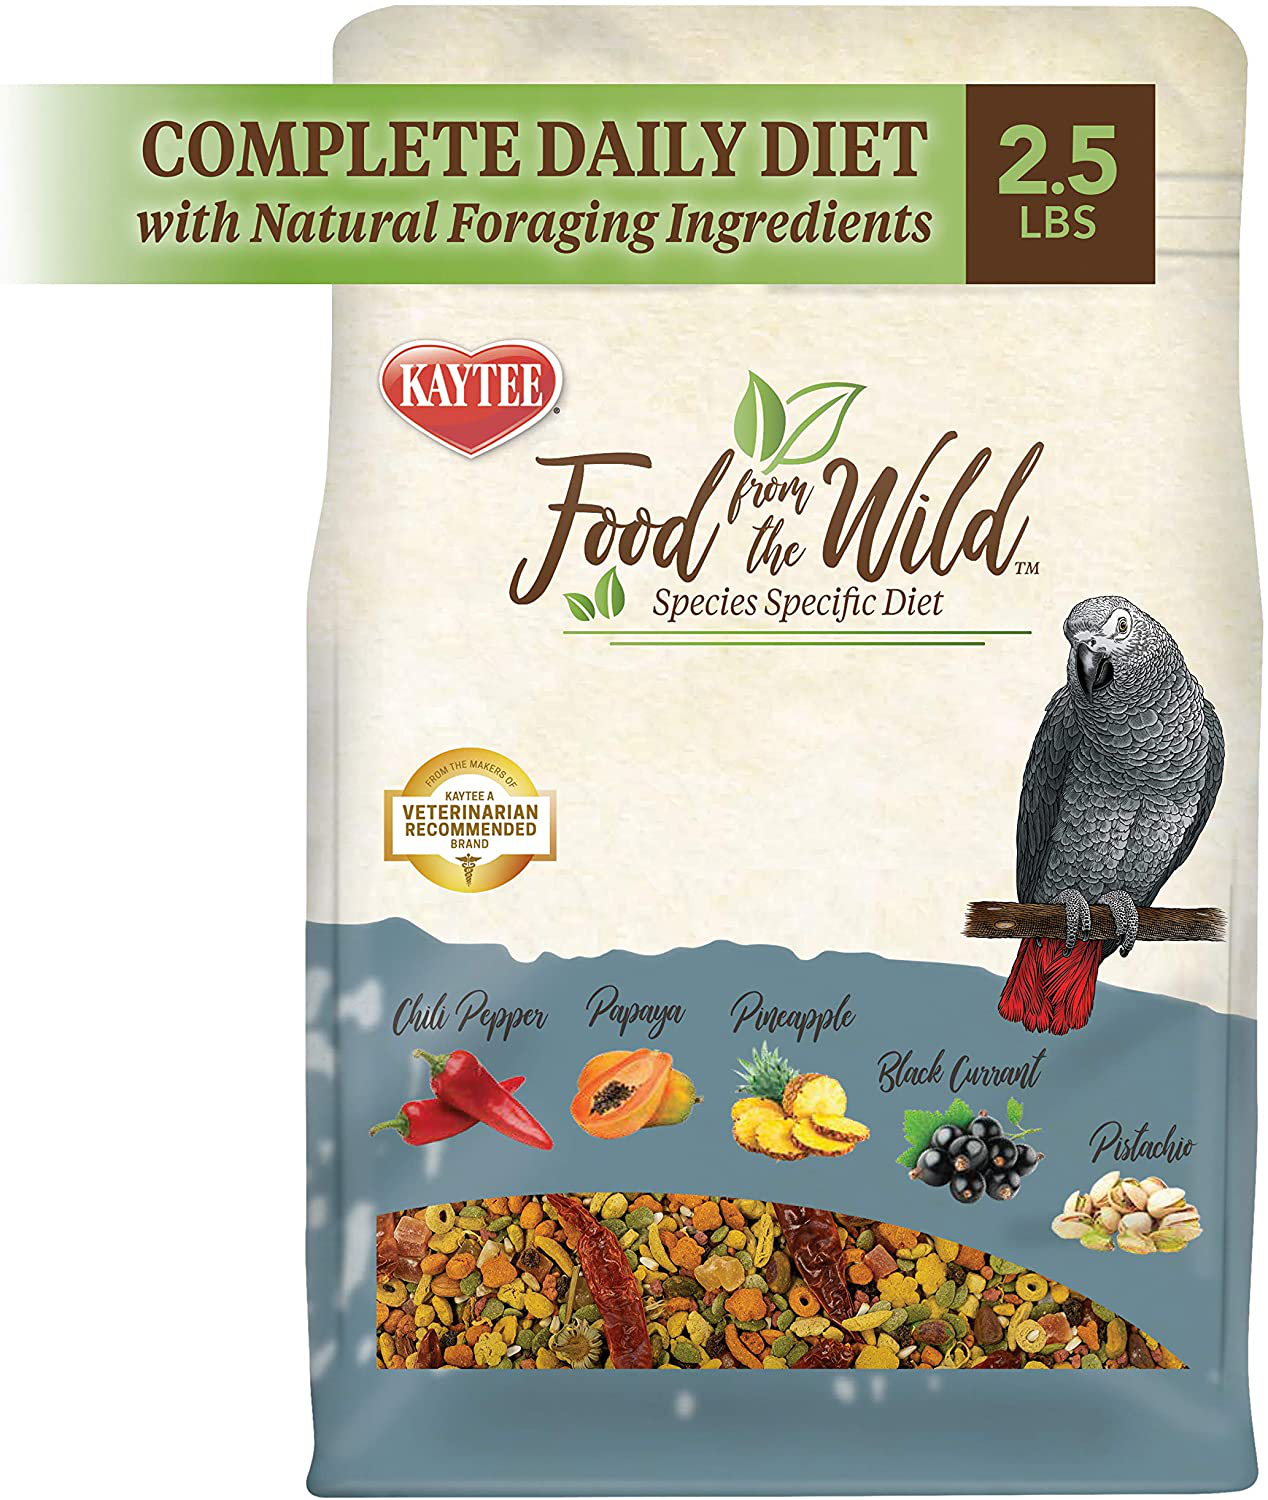 Kaytee Food from the Wild, Parrot Food, 2.5 Pounds